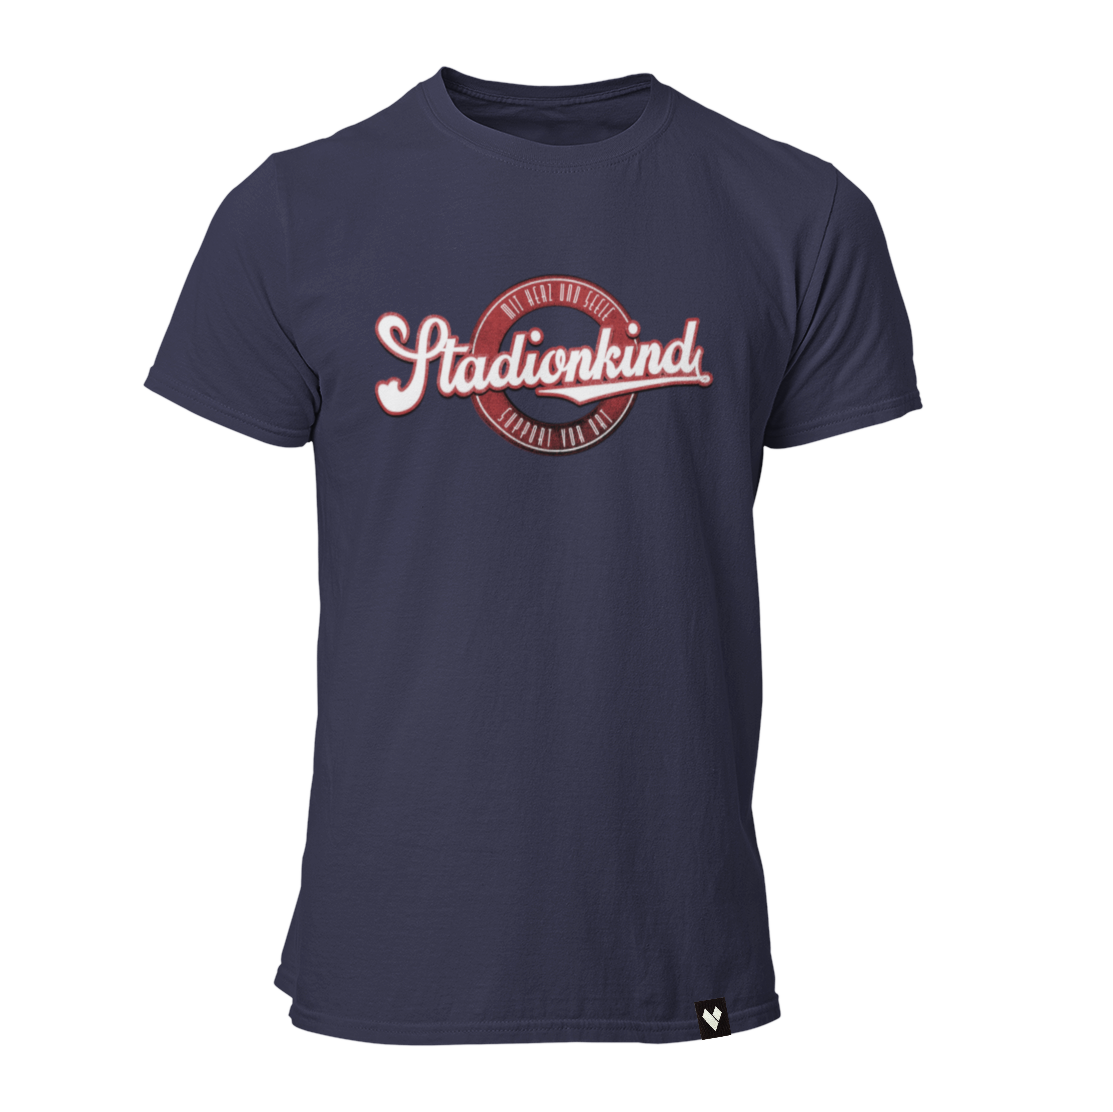 mockup-of-a-ghosted-men-s-t-shirt-in-front-view-29349 - 2021-03-16T113916.998.png